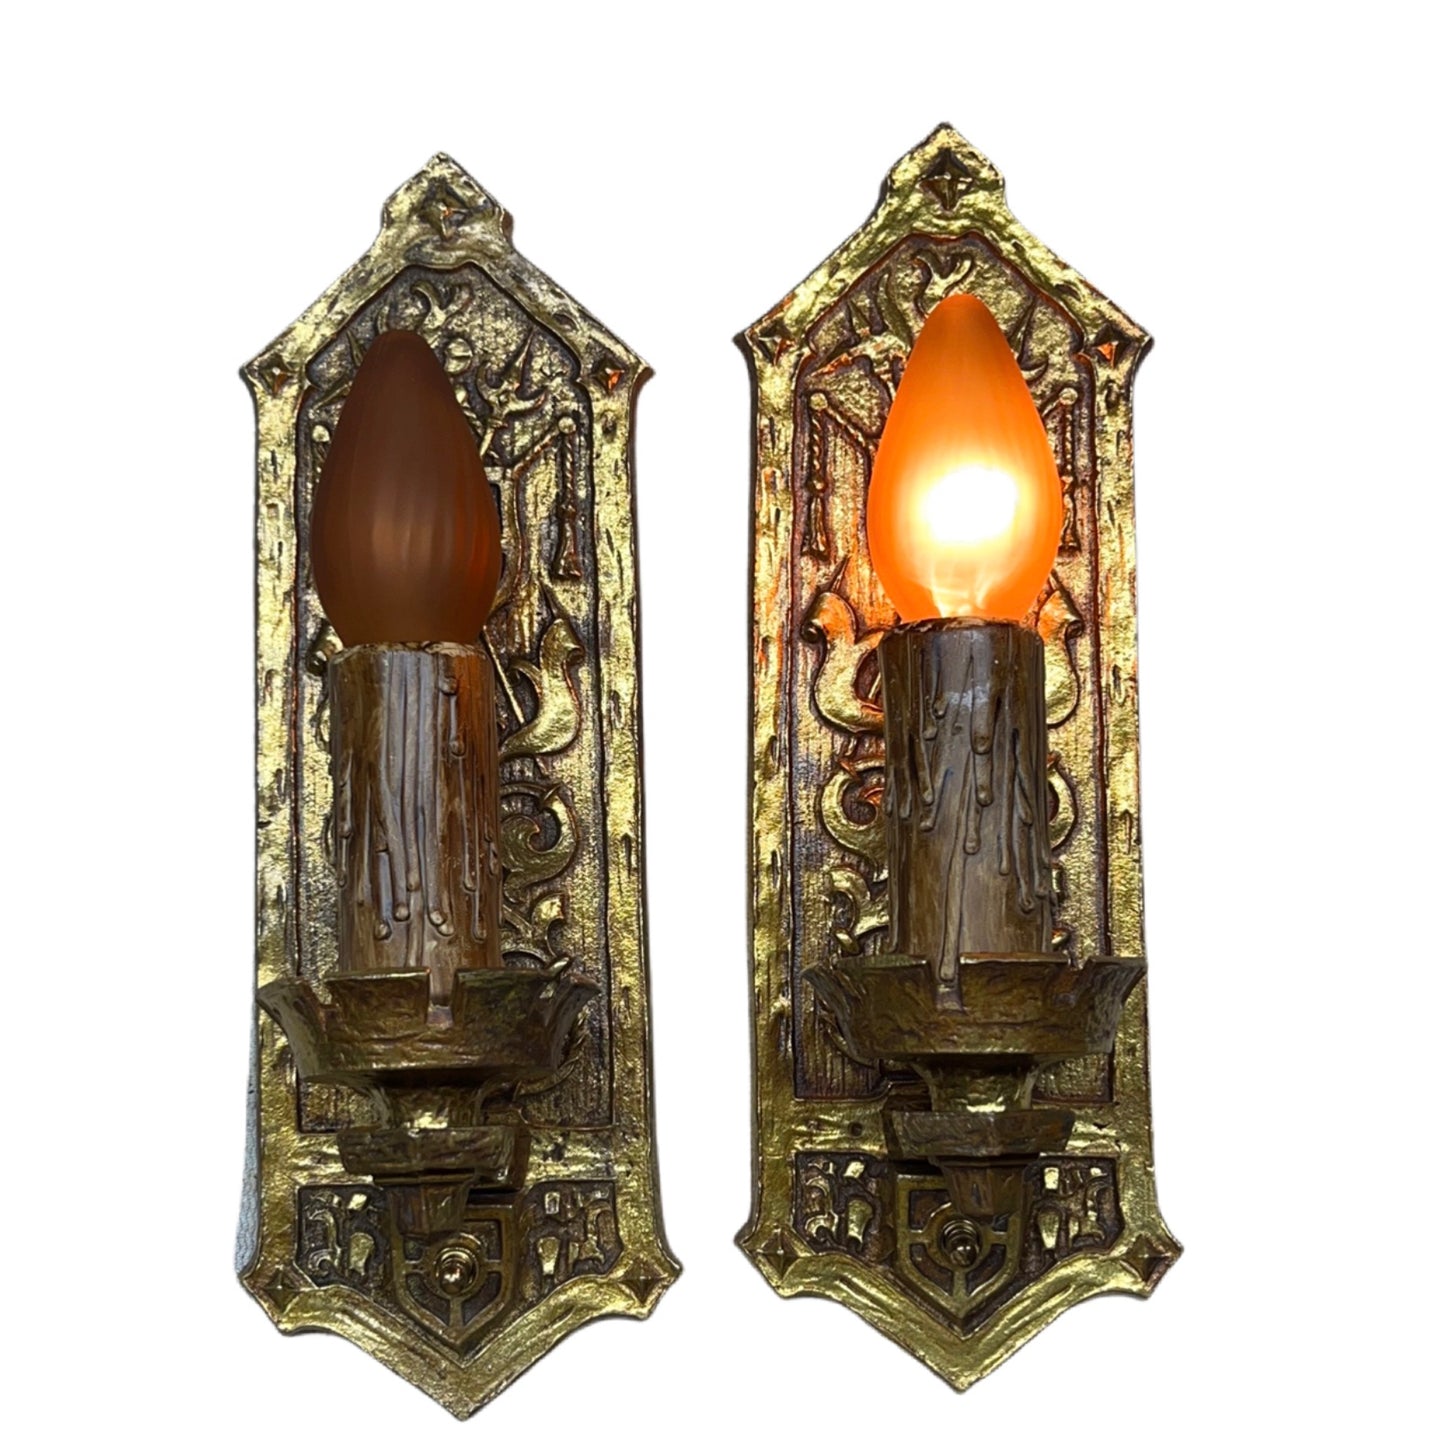 Romantic Revival Wall Sconces in Solid Brass